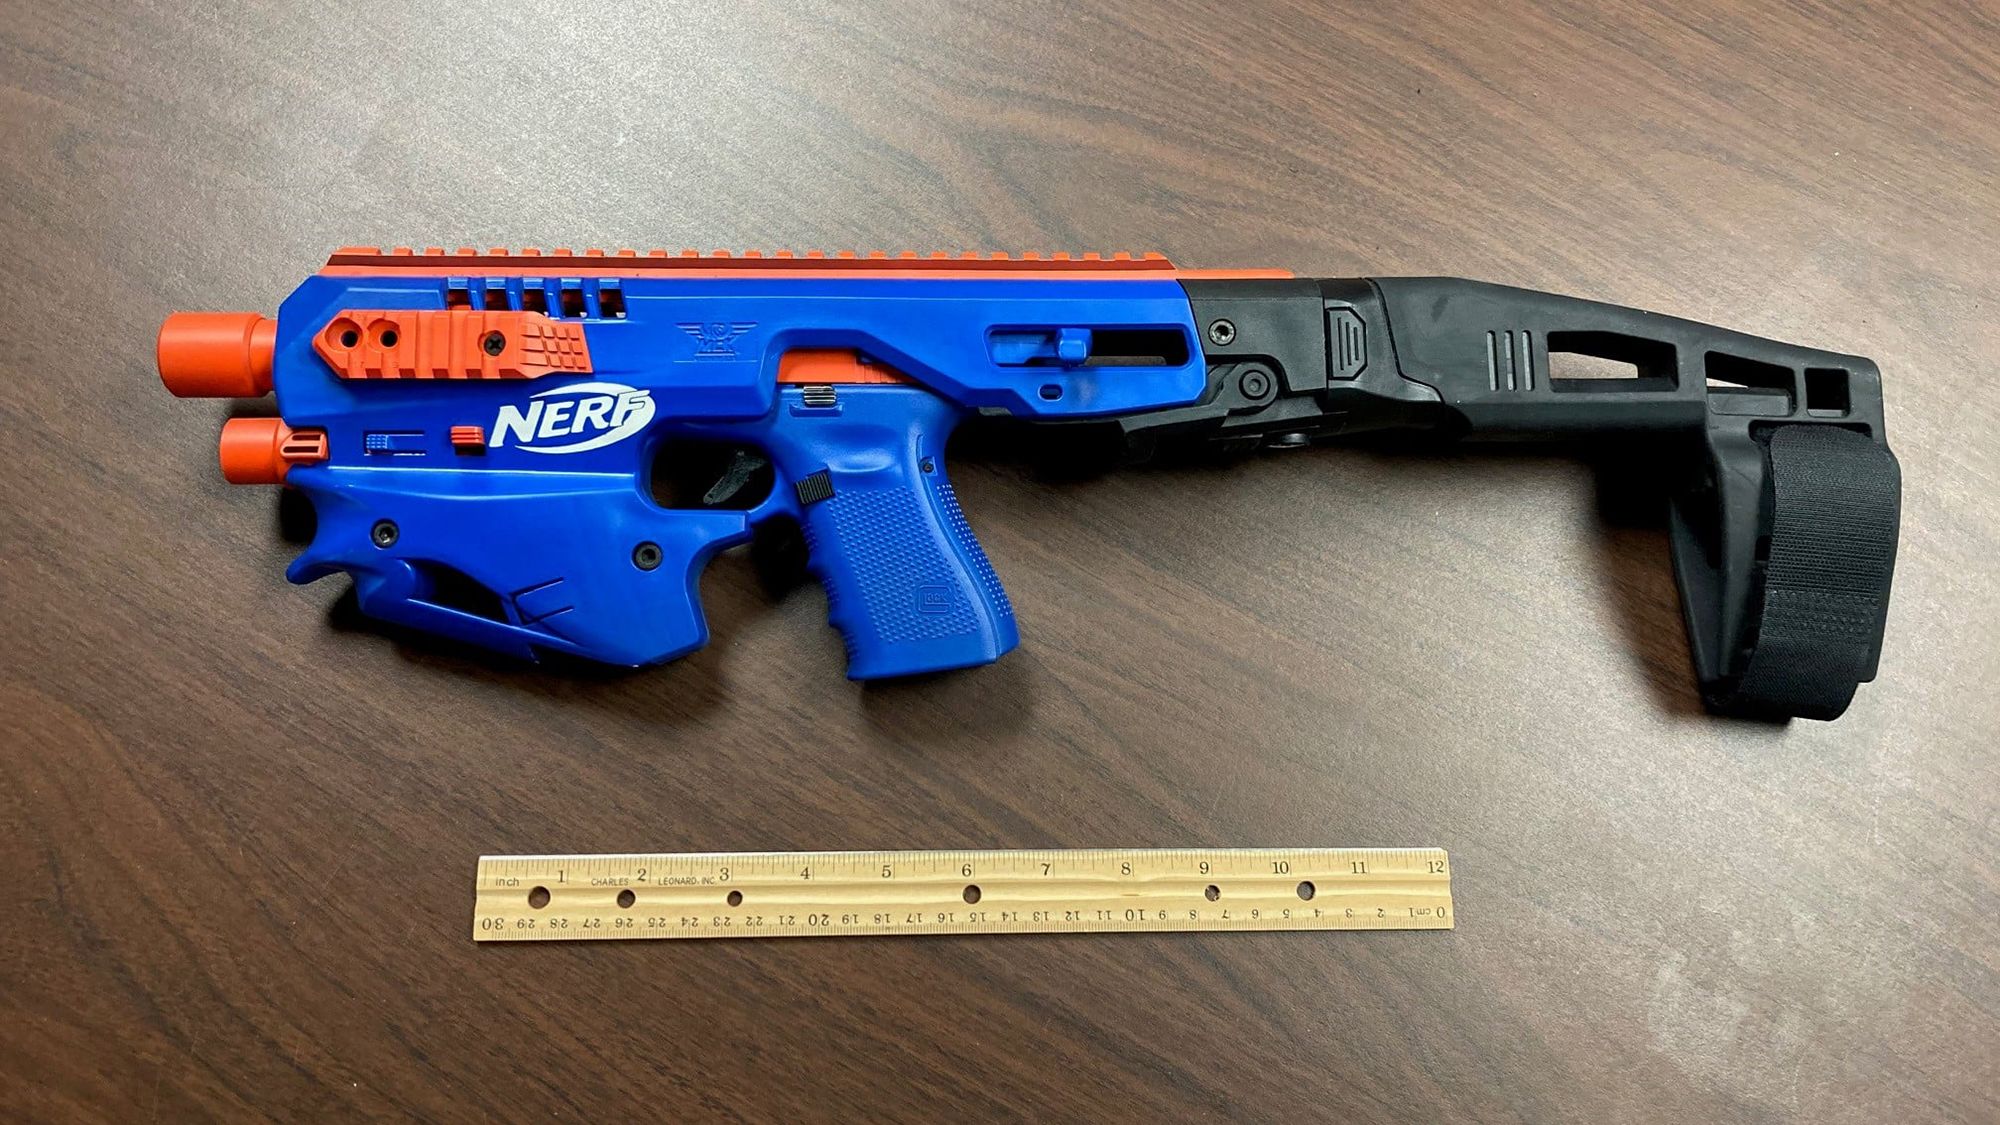 Nerf gun: Real disguised as toy found in raid |